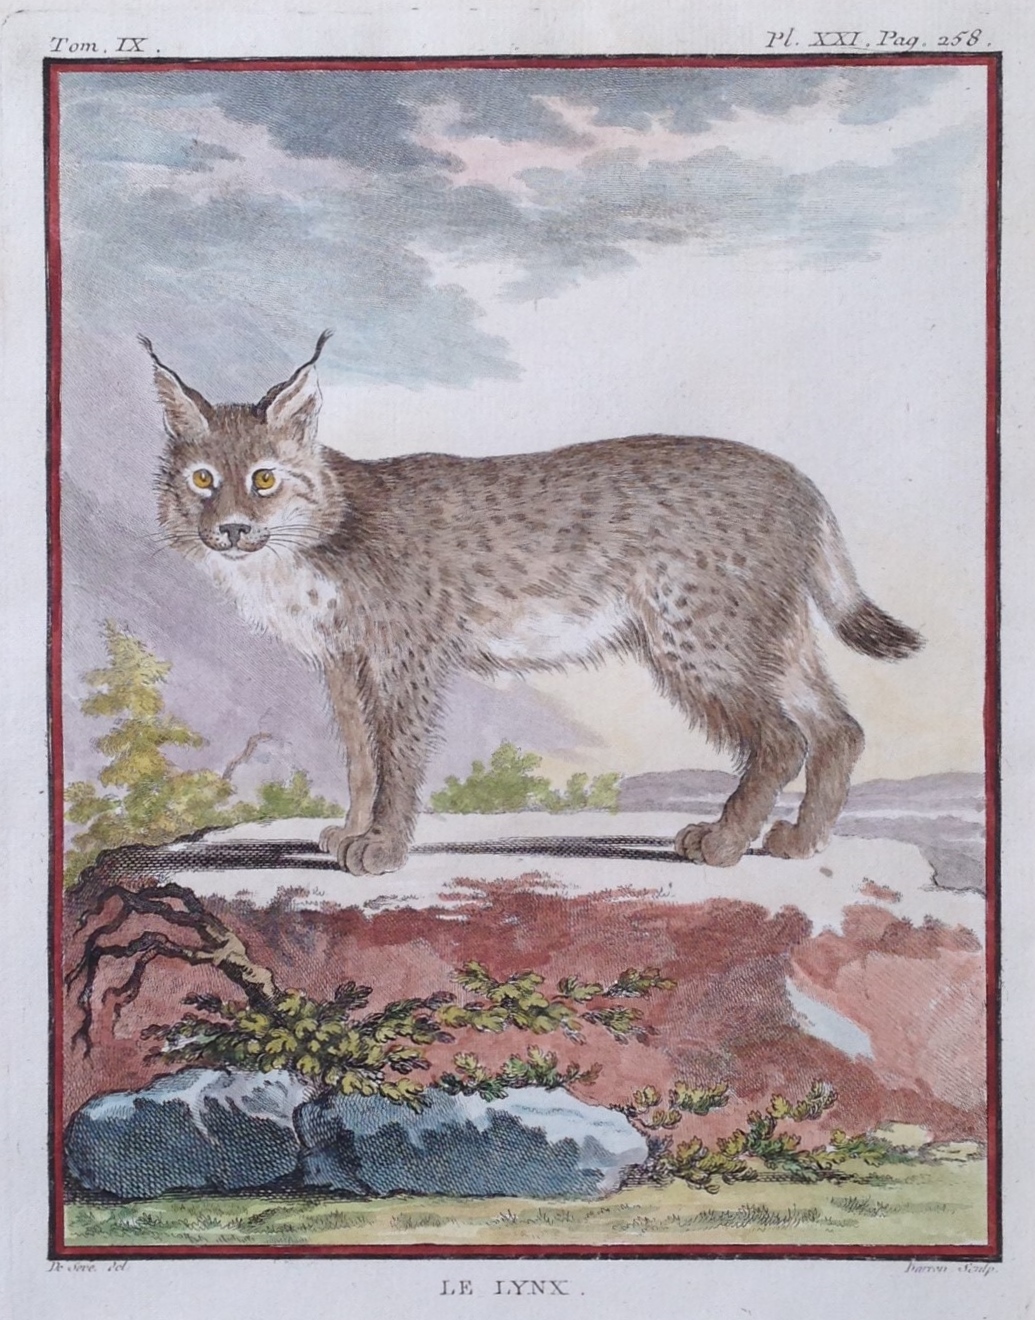 mounted and backed. Canadian Lynx Original c1800 engraving by Buffon